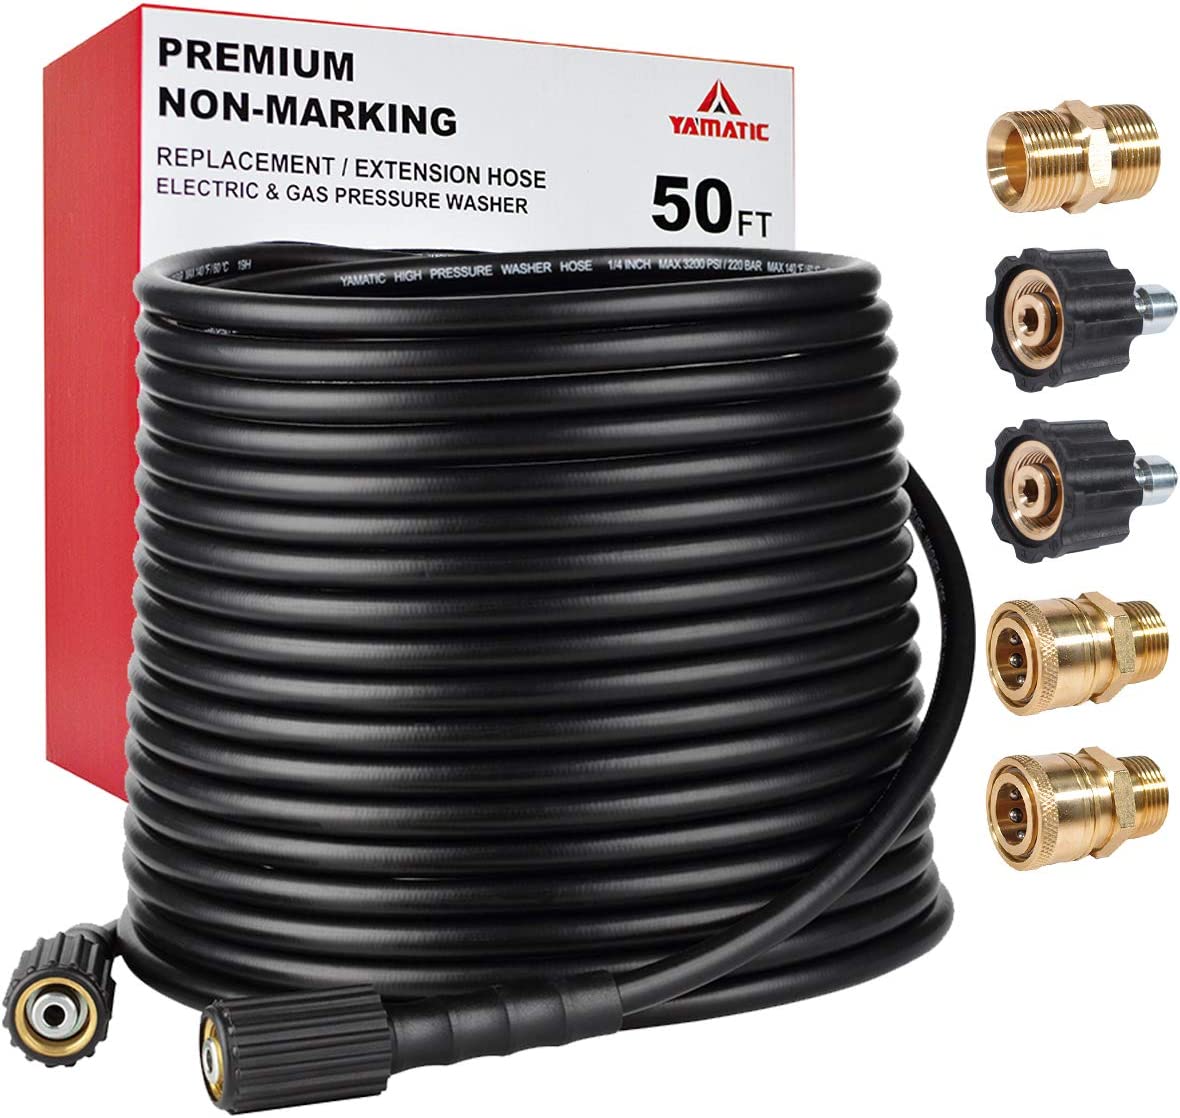 YAMATIC 1/4" Pressure Washer Hose 50ft 3200 PSI with M22 to 3/8" Adapters